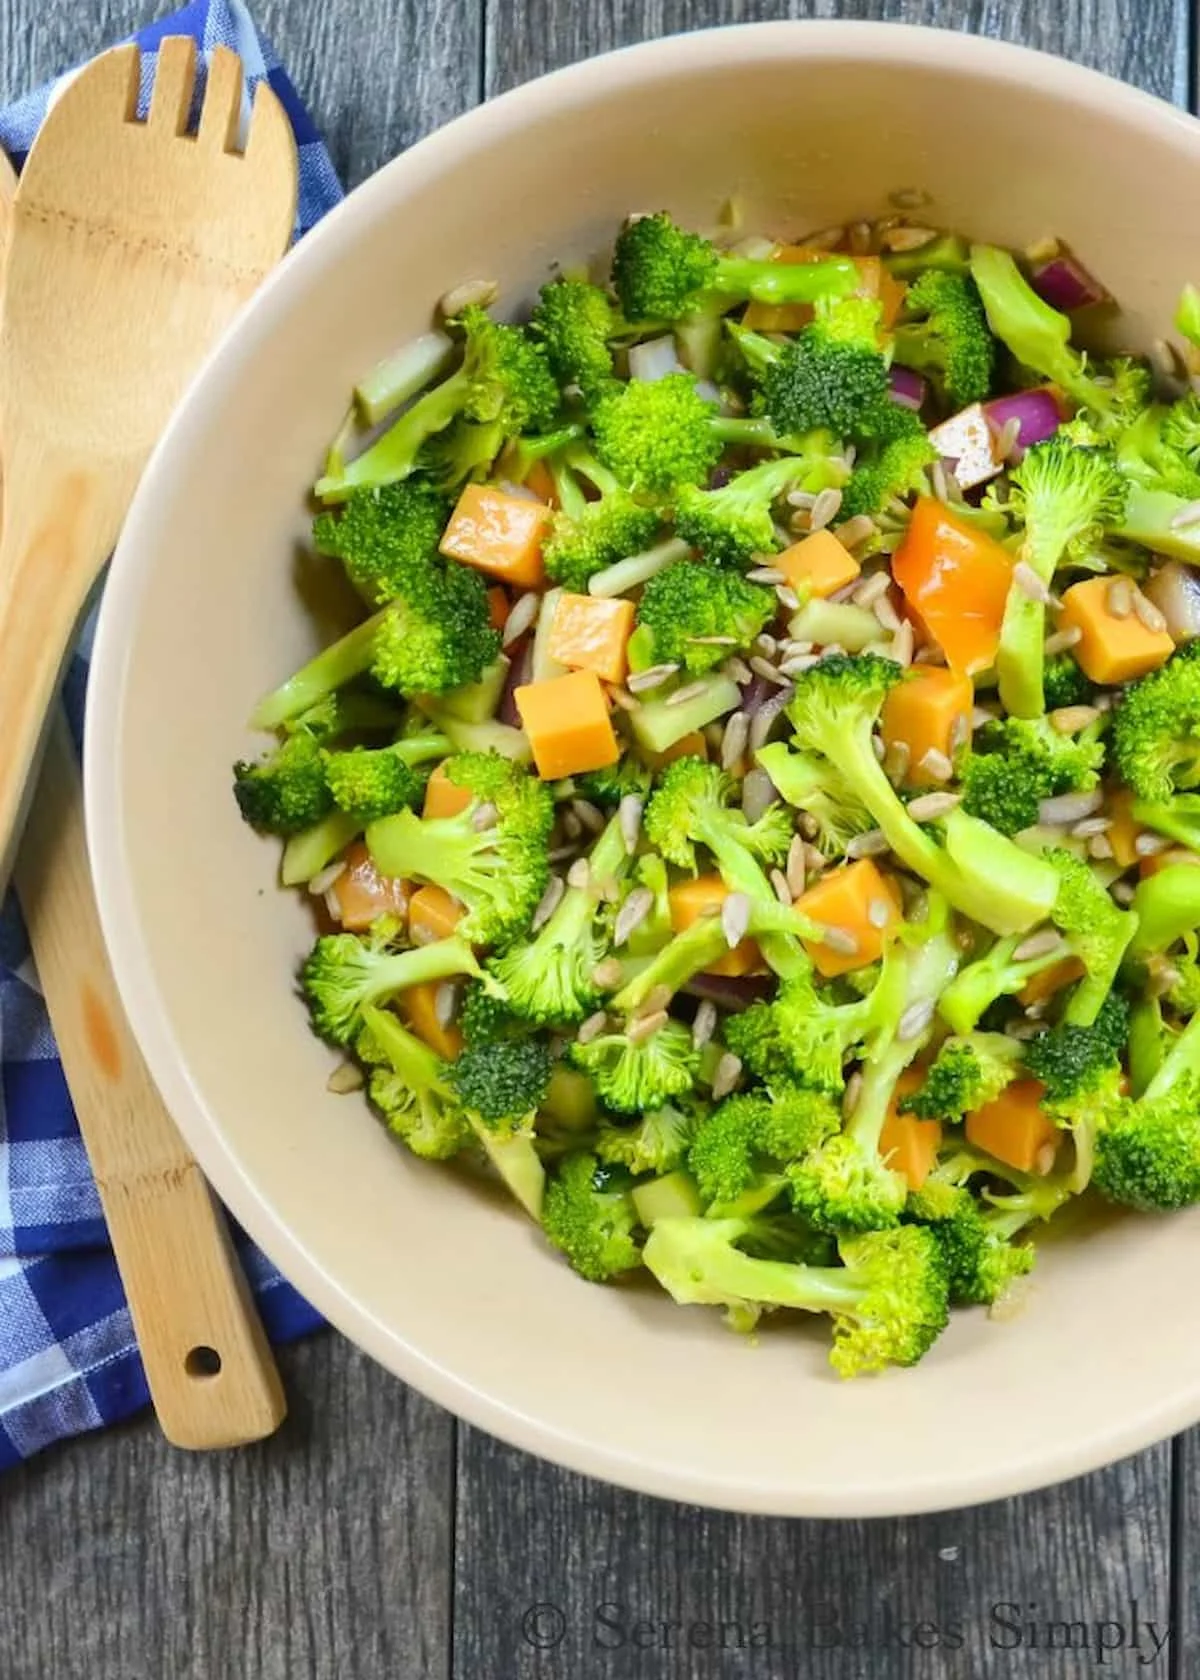 The best crunchy Broccoli Salad recipe in a light sesame seed dressing with cheddar cheese and sunflower seeds is the perfect salad for any gathering including Thanksgiving and Christmas from Serena Bakes Simply From Scratch.